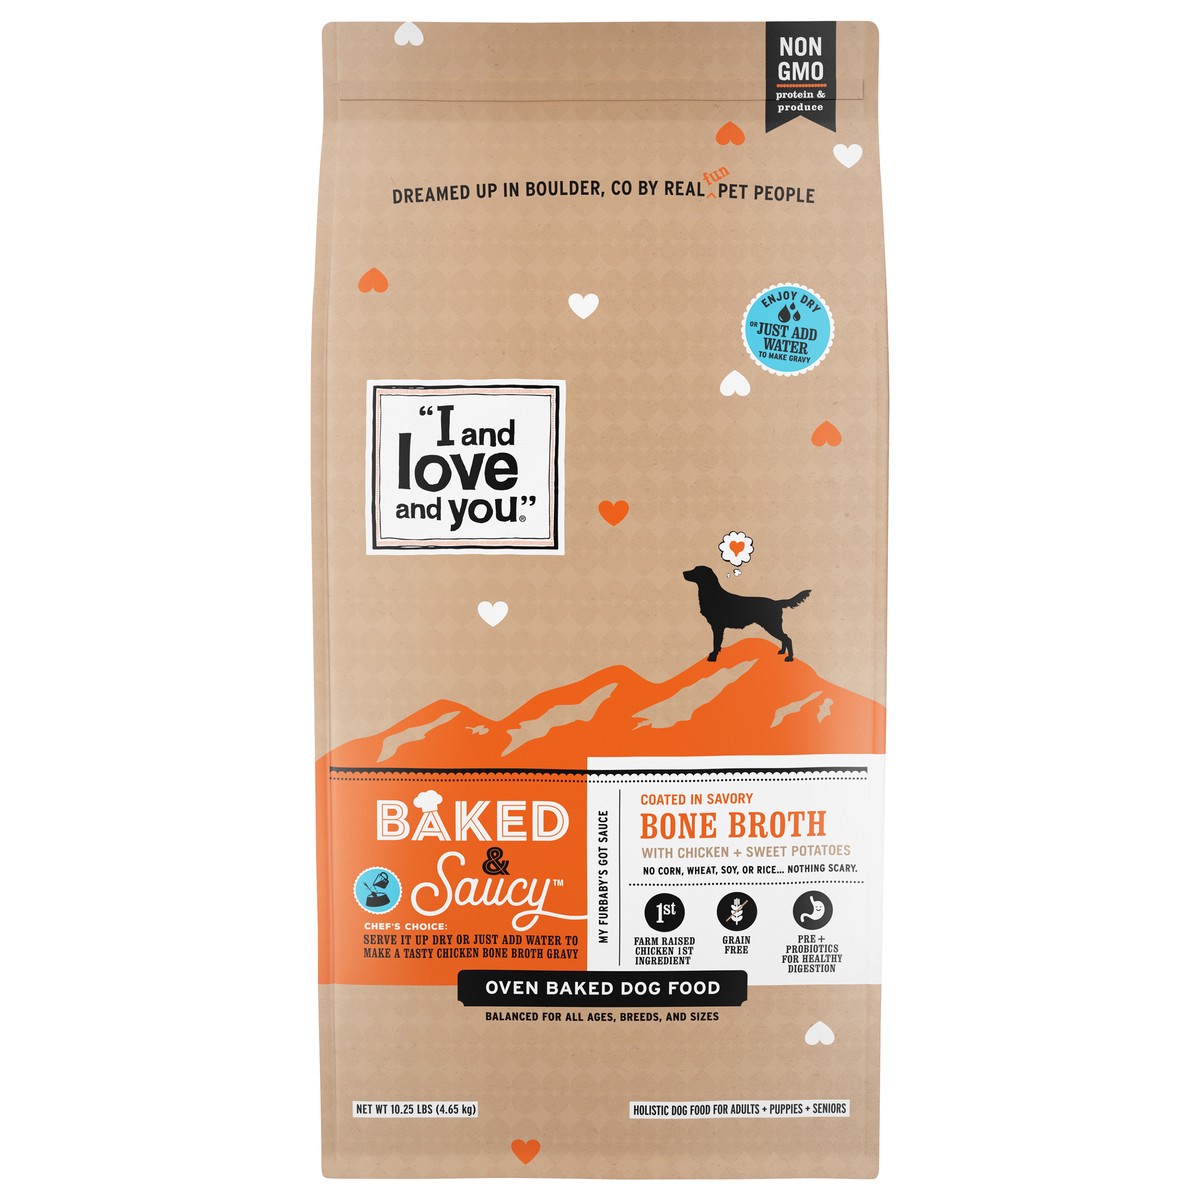 slide 1 of 9, I and Love and You Baked & Saucy Oven Baked Bone Broth with Chicken + Sweet Potatoes Dog Food 10.25 lb, 10.25 lb